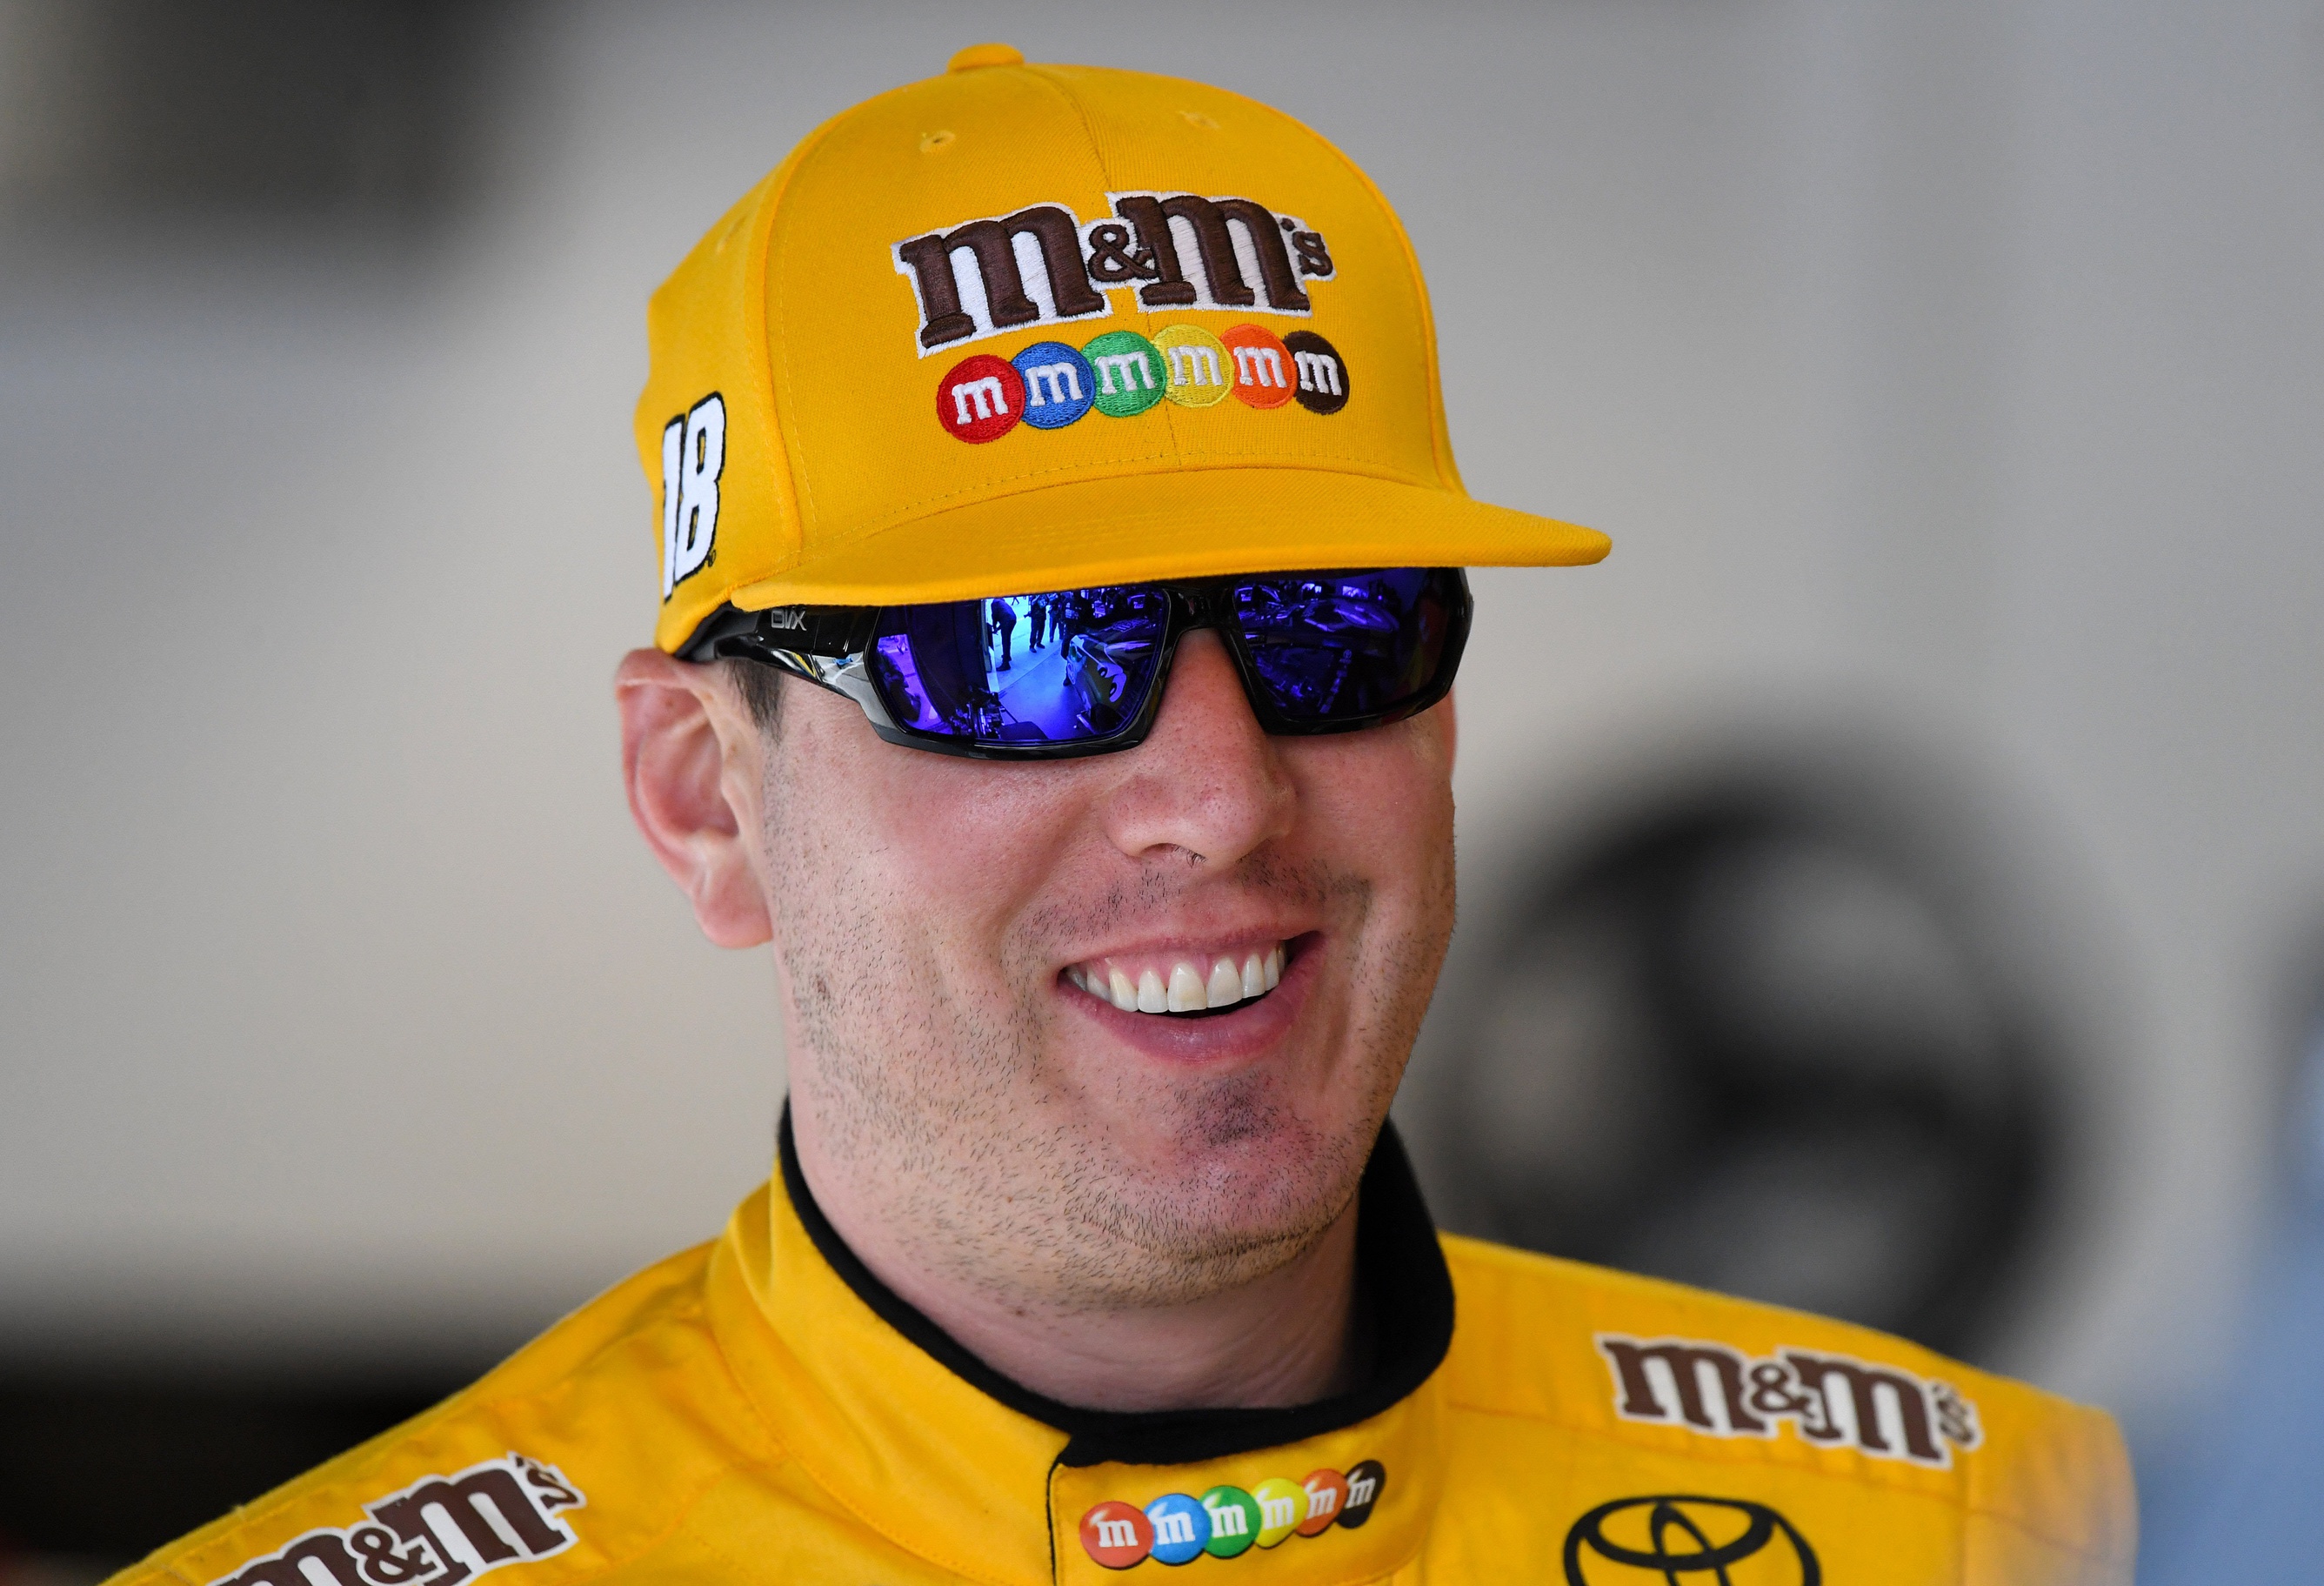 WATCH: Kyle Busch made a real-life Mario Kart course for his kids2672 x 1823